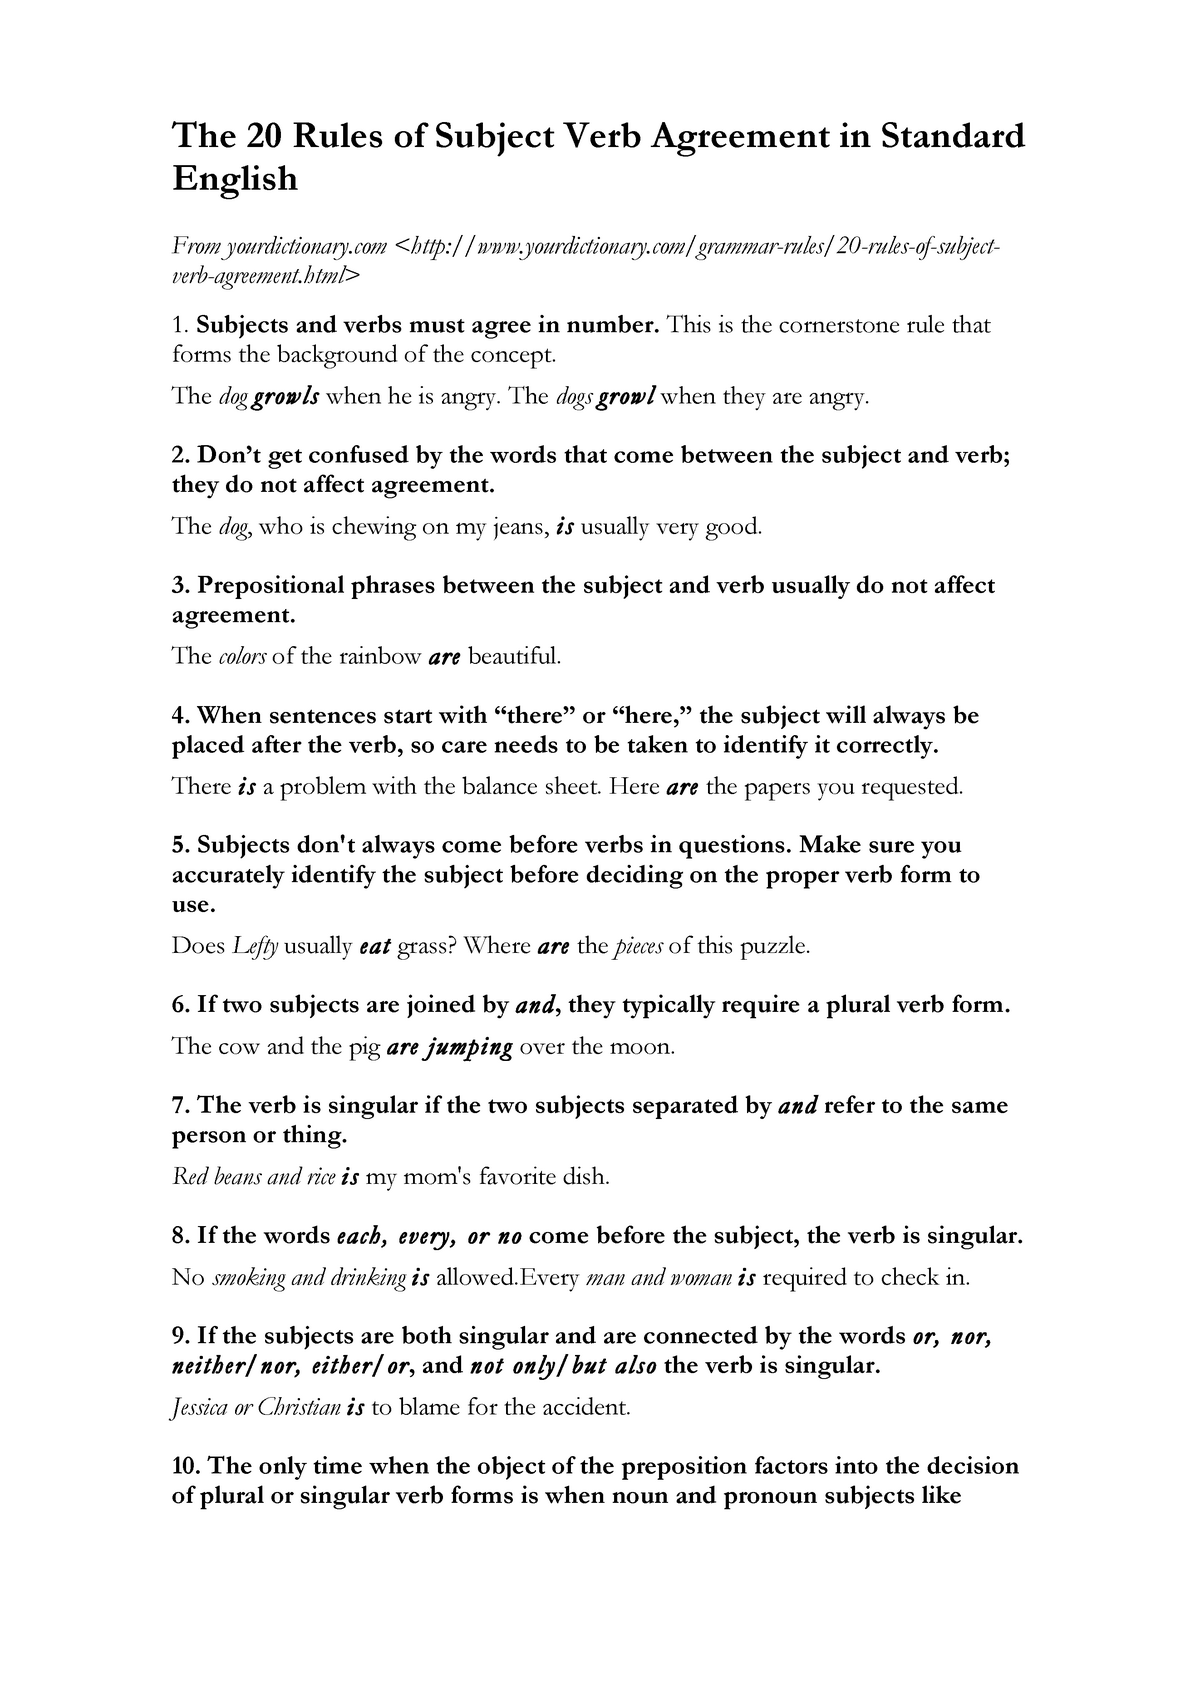 the-20-rules-of-subject-verb-agreement-in-standard-english-bachelor